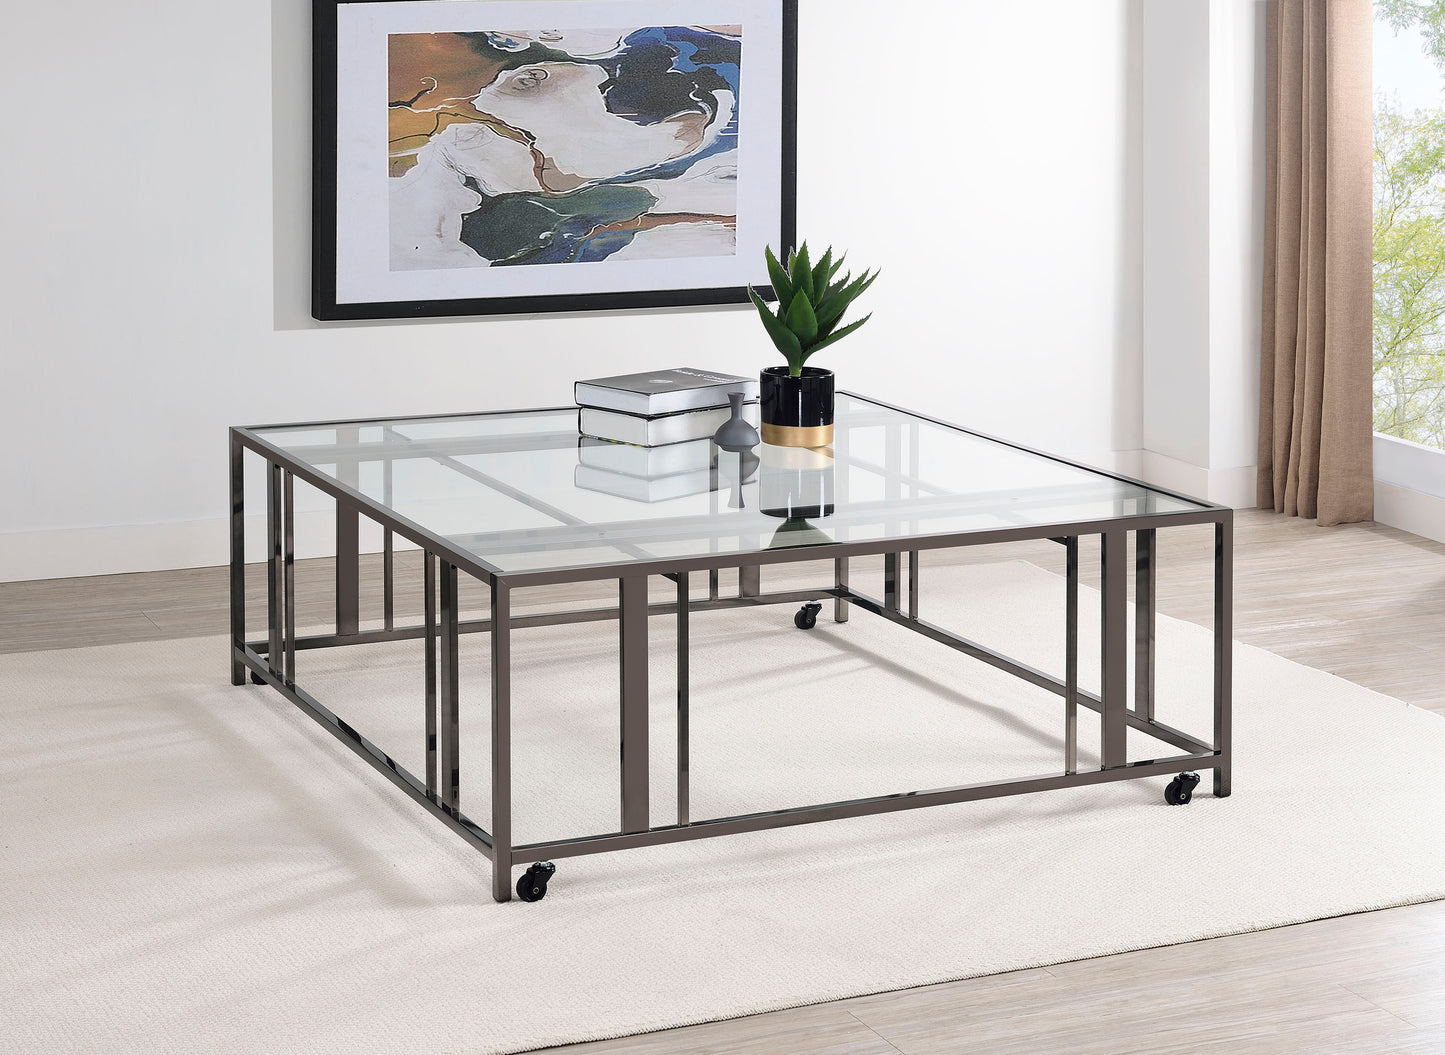 Adri Square Glass Top Coffee Table with Casters Black Nickel